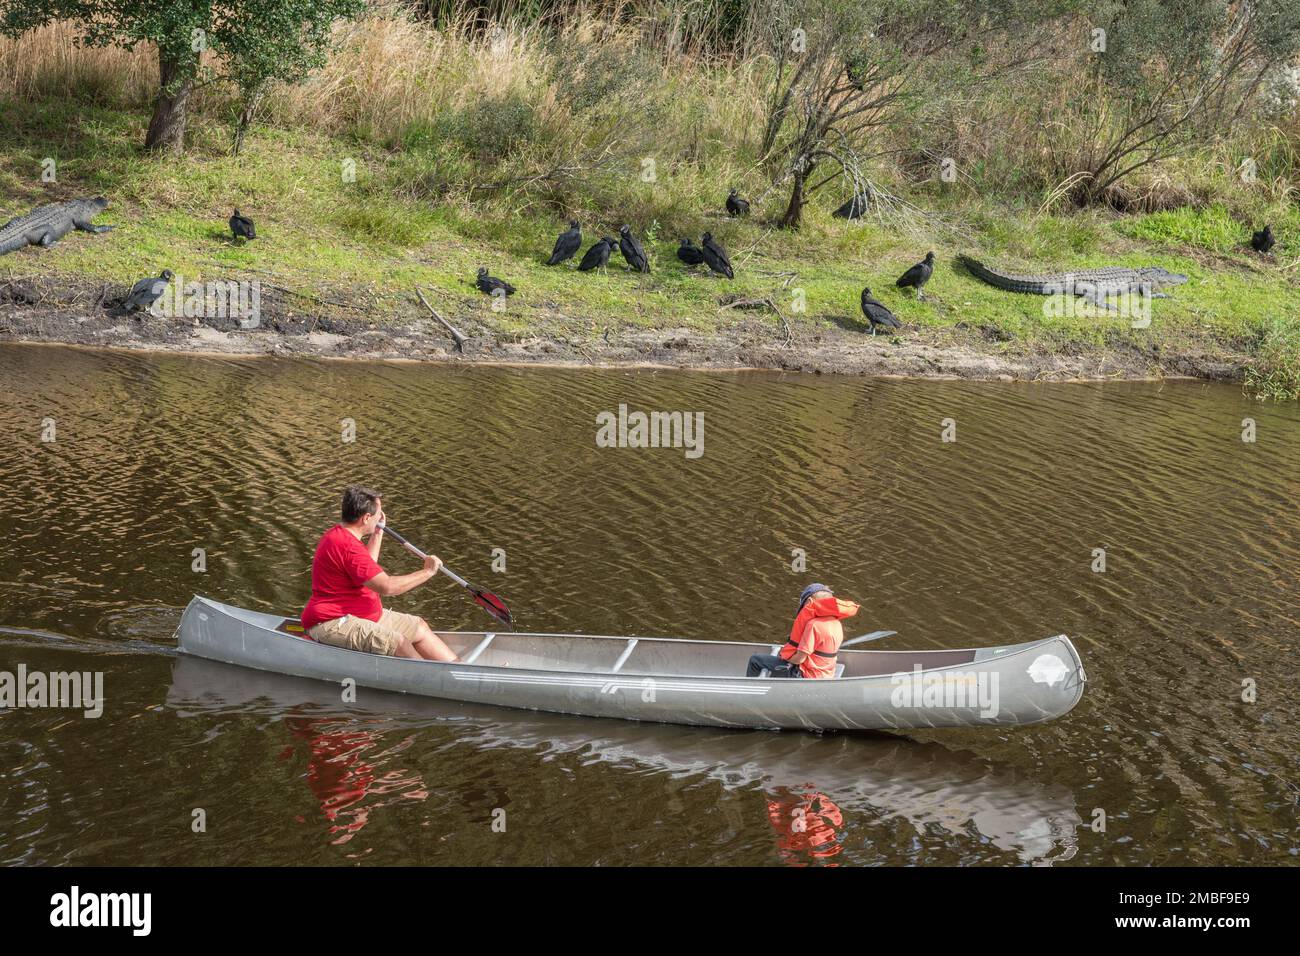 Myakka River State Park, FL, US-November 28, 2021: Father and small son canoeing in river with alligators nearby on riverbank. Stock Photo